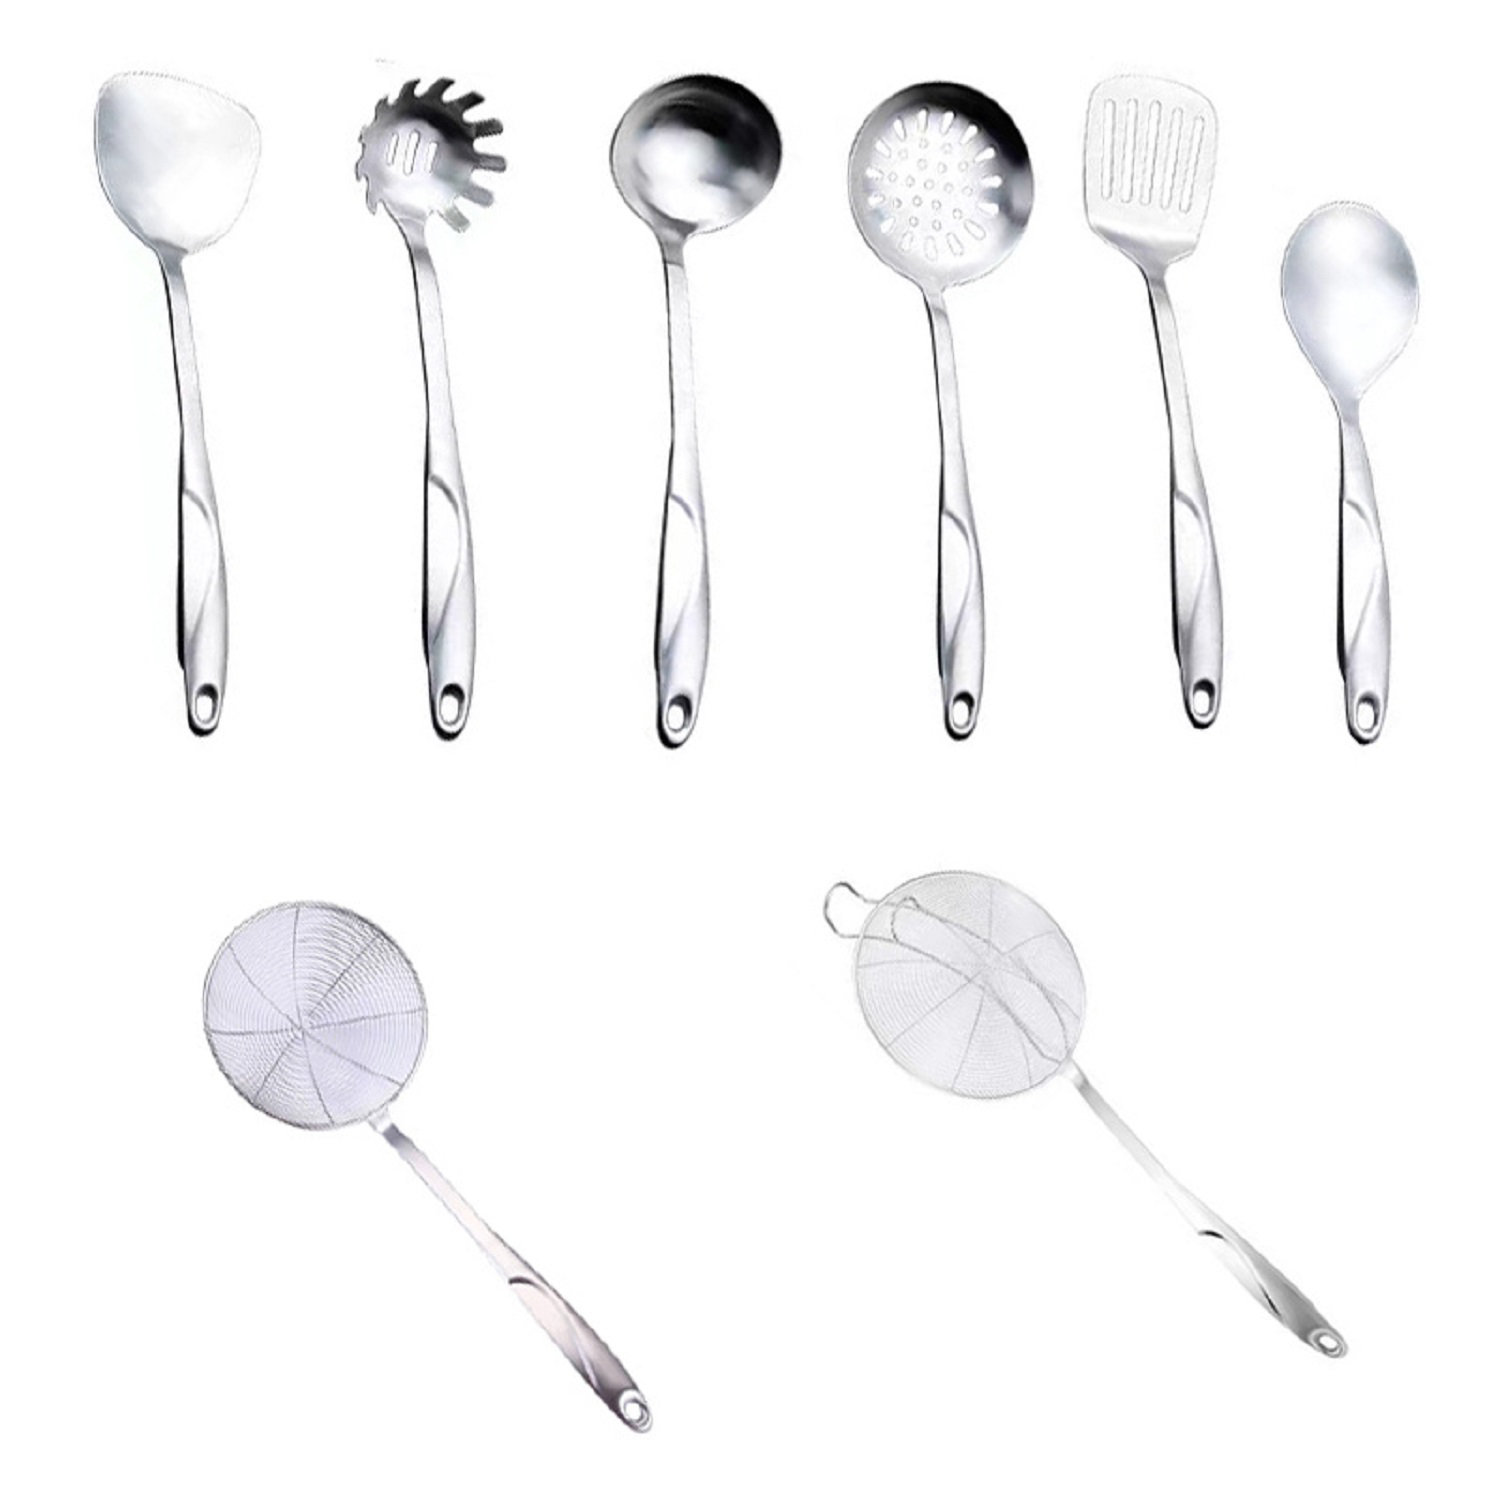  304 Stainless Steel Kitchen Utensils Set, 6 Pcs Metal  Professional Cooking Spoons, Kitchen Tools - Wok Spatula, Ladle, Skimmer  Slotted Spoon, Pasta Spoon, Serving Large Spoon, Slotted Spatula Tunner :  Home & Kitchen